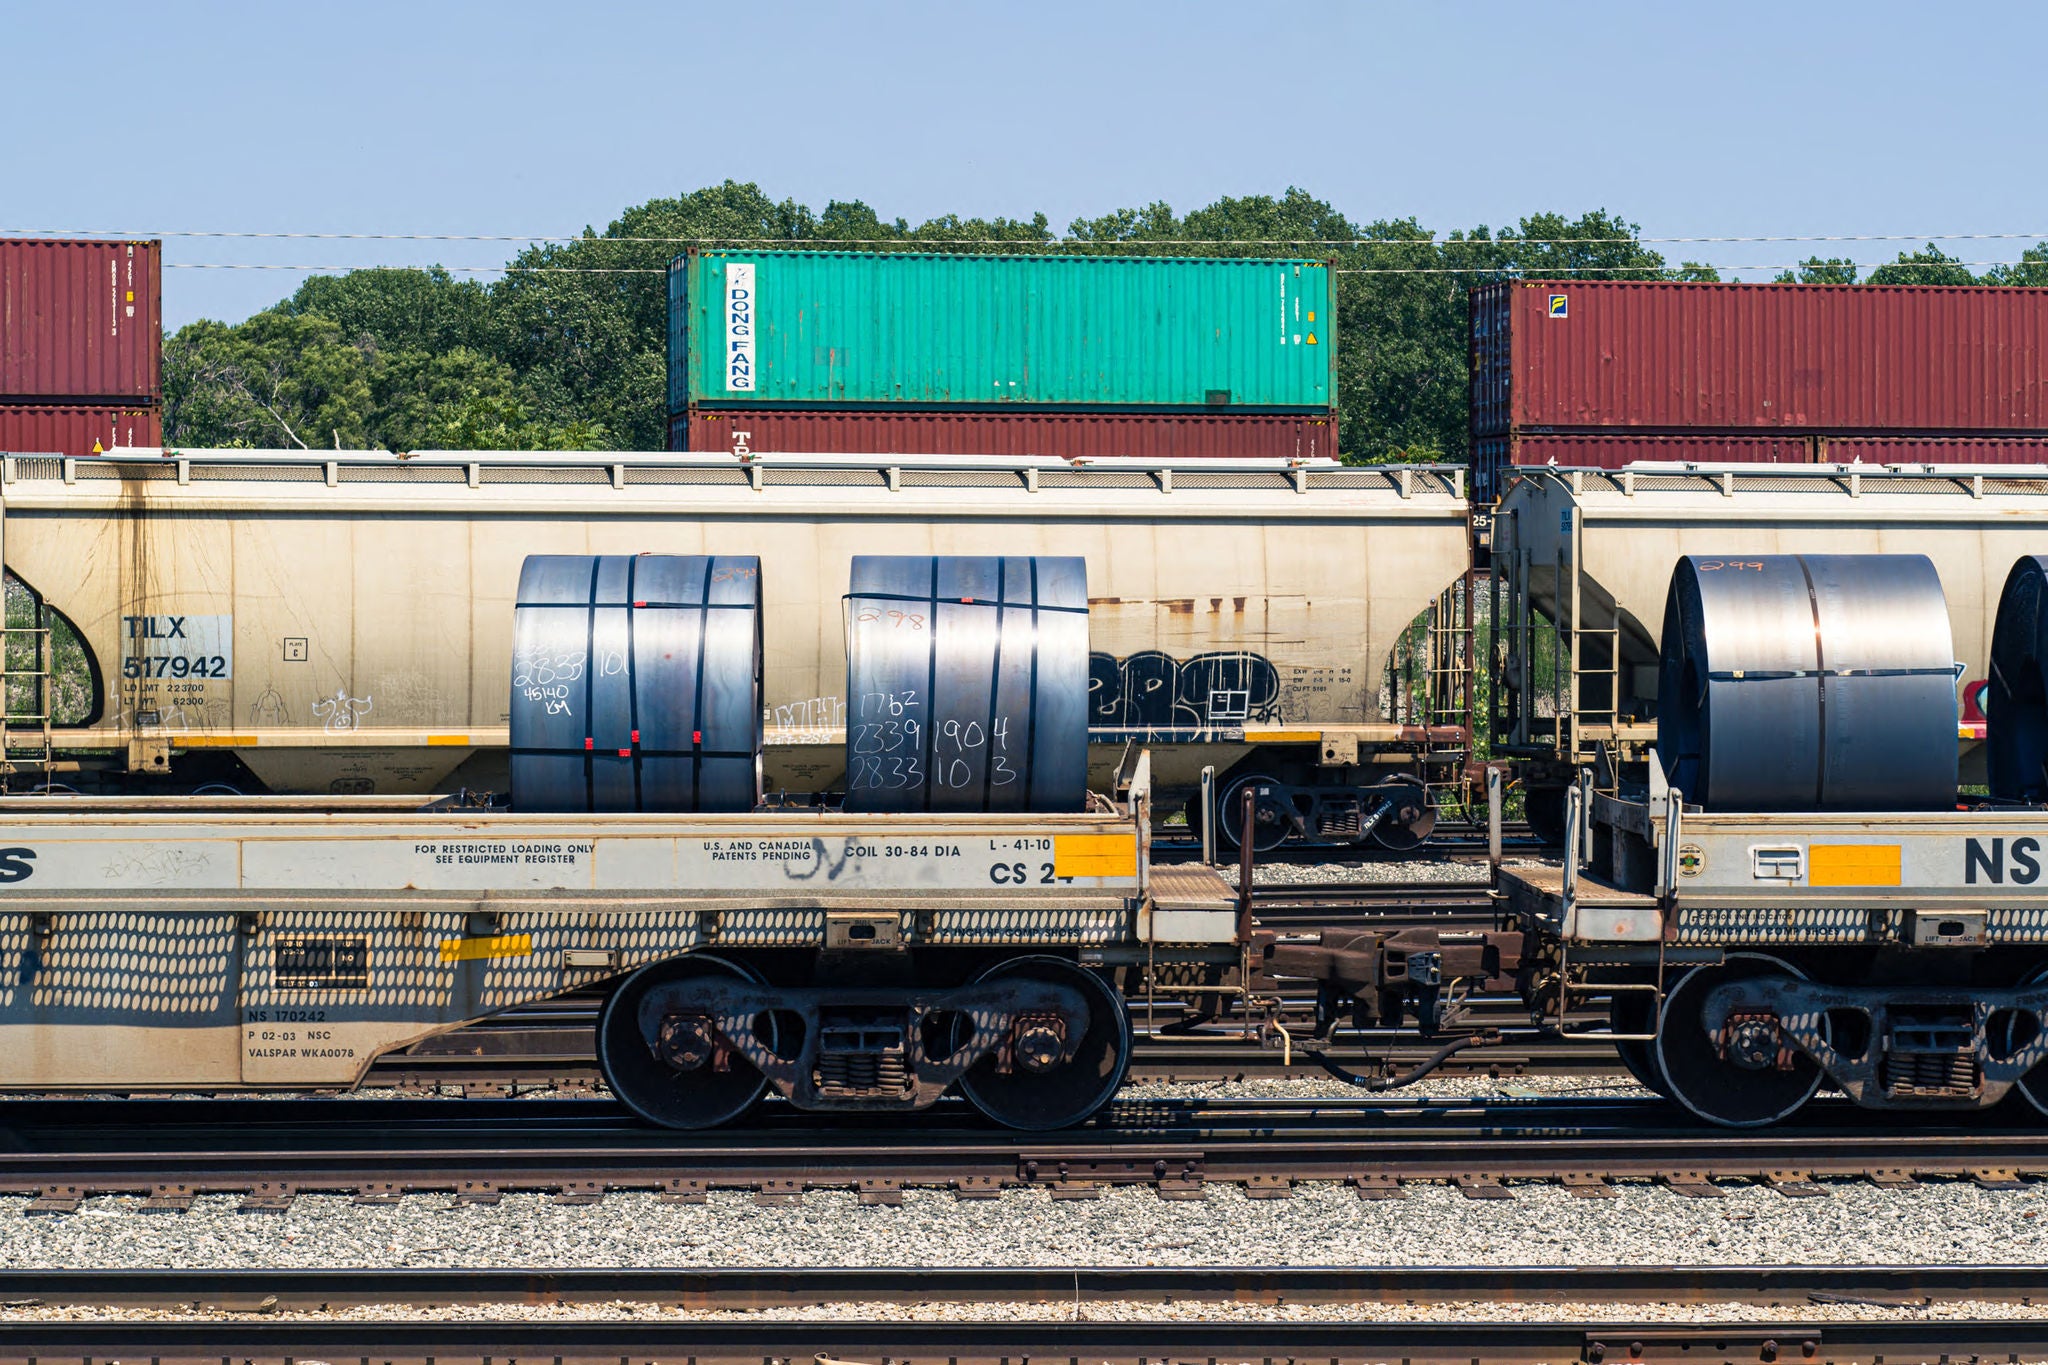 Rail industry container